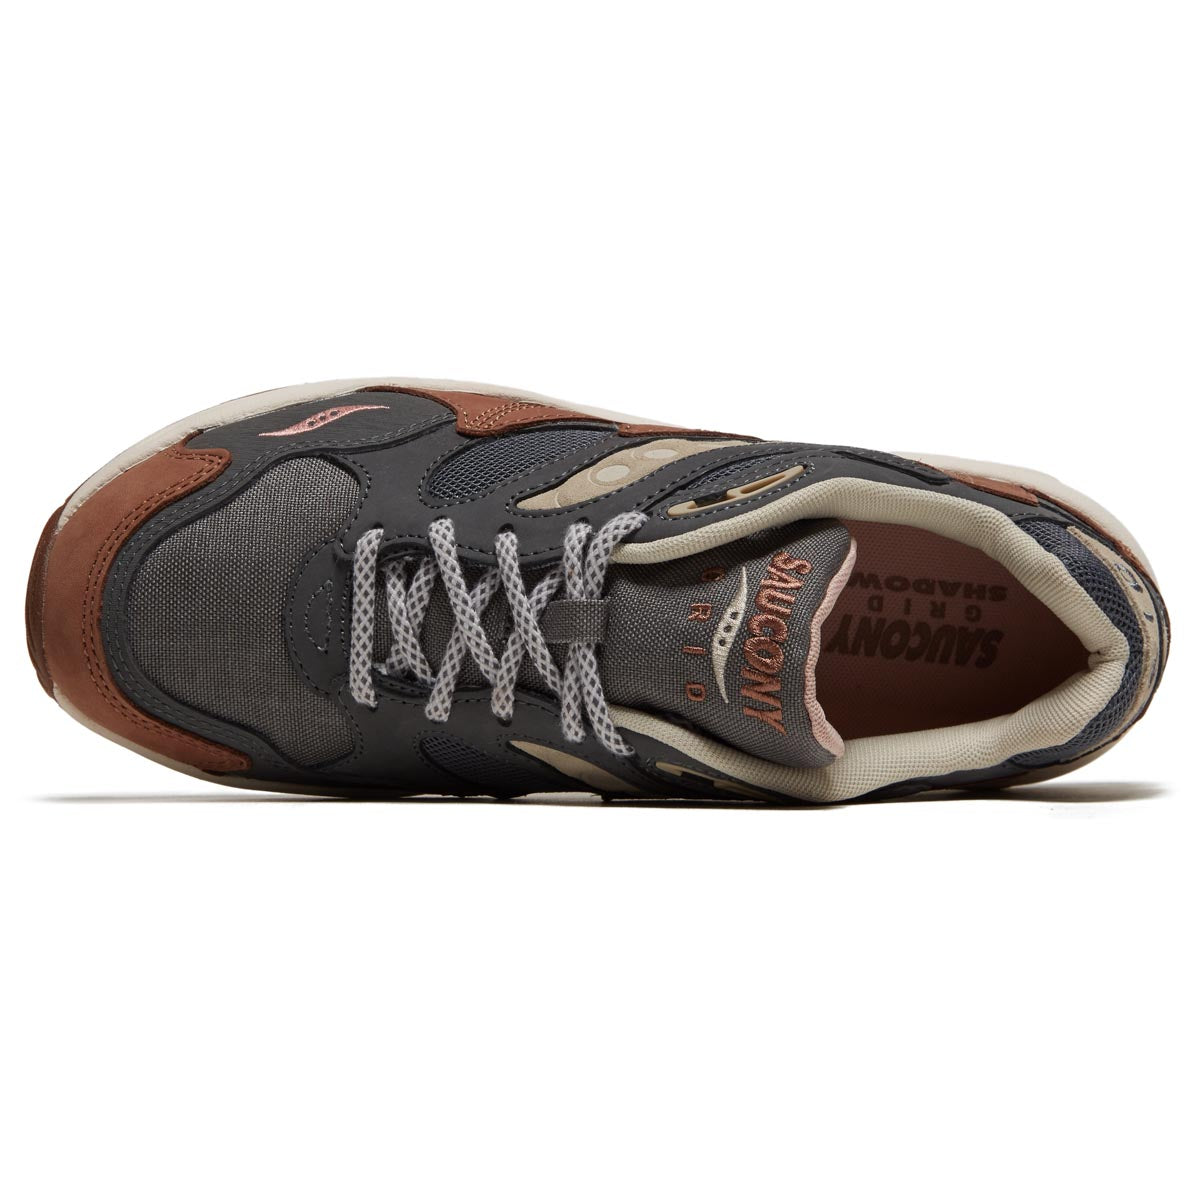 Saucony Grid Shadow 2 Shoes - Grey/Brown image 3